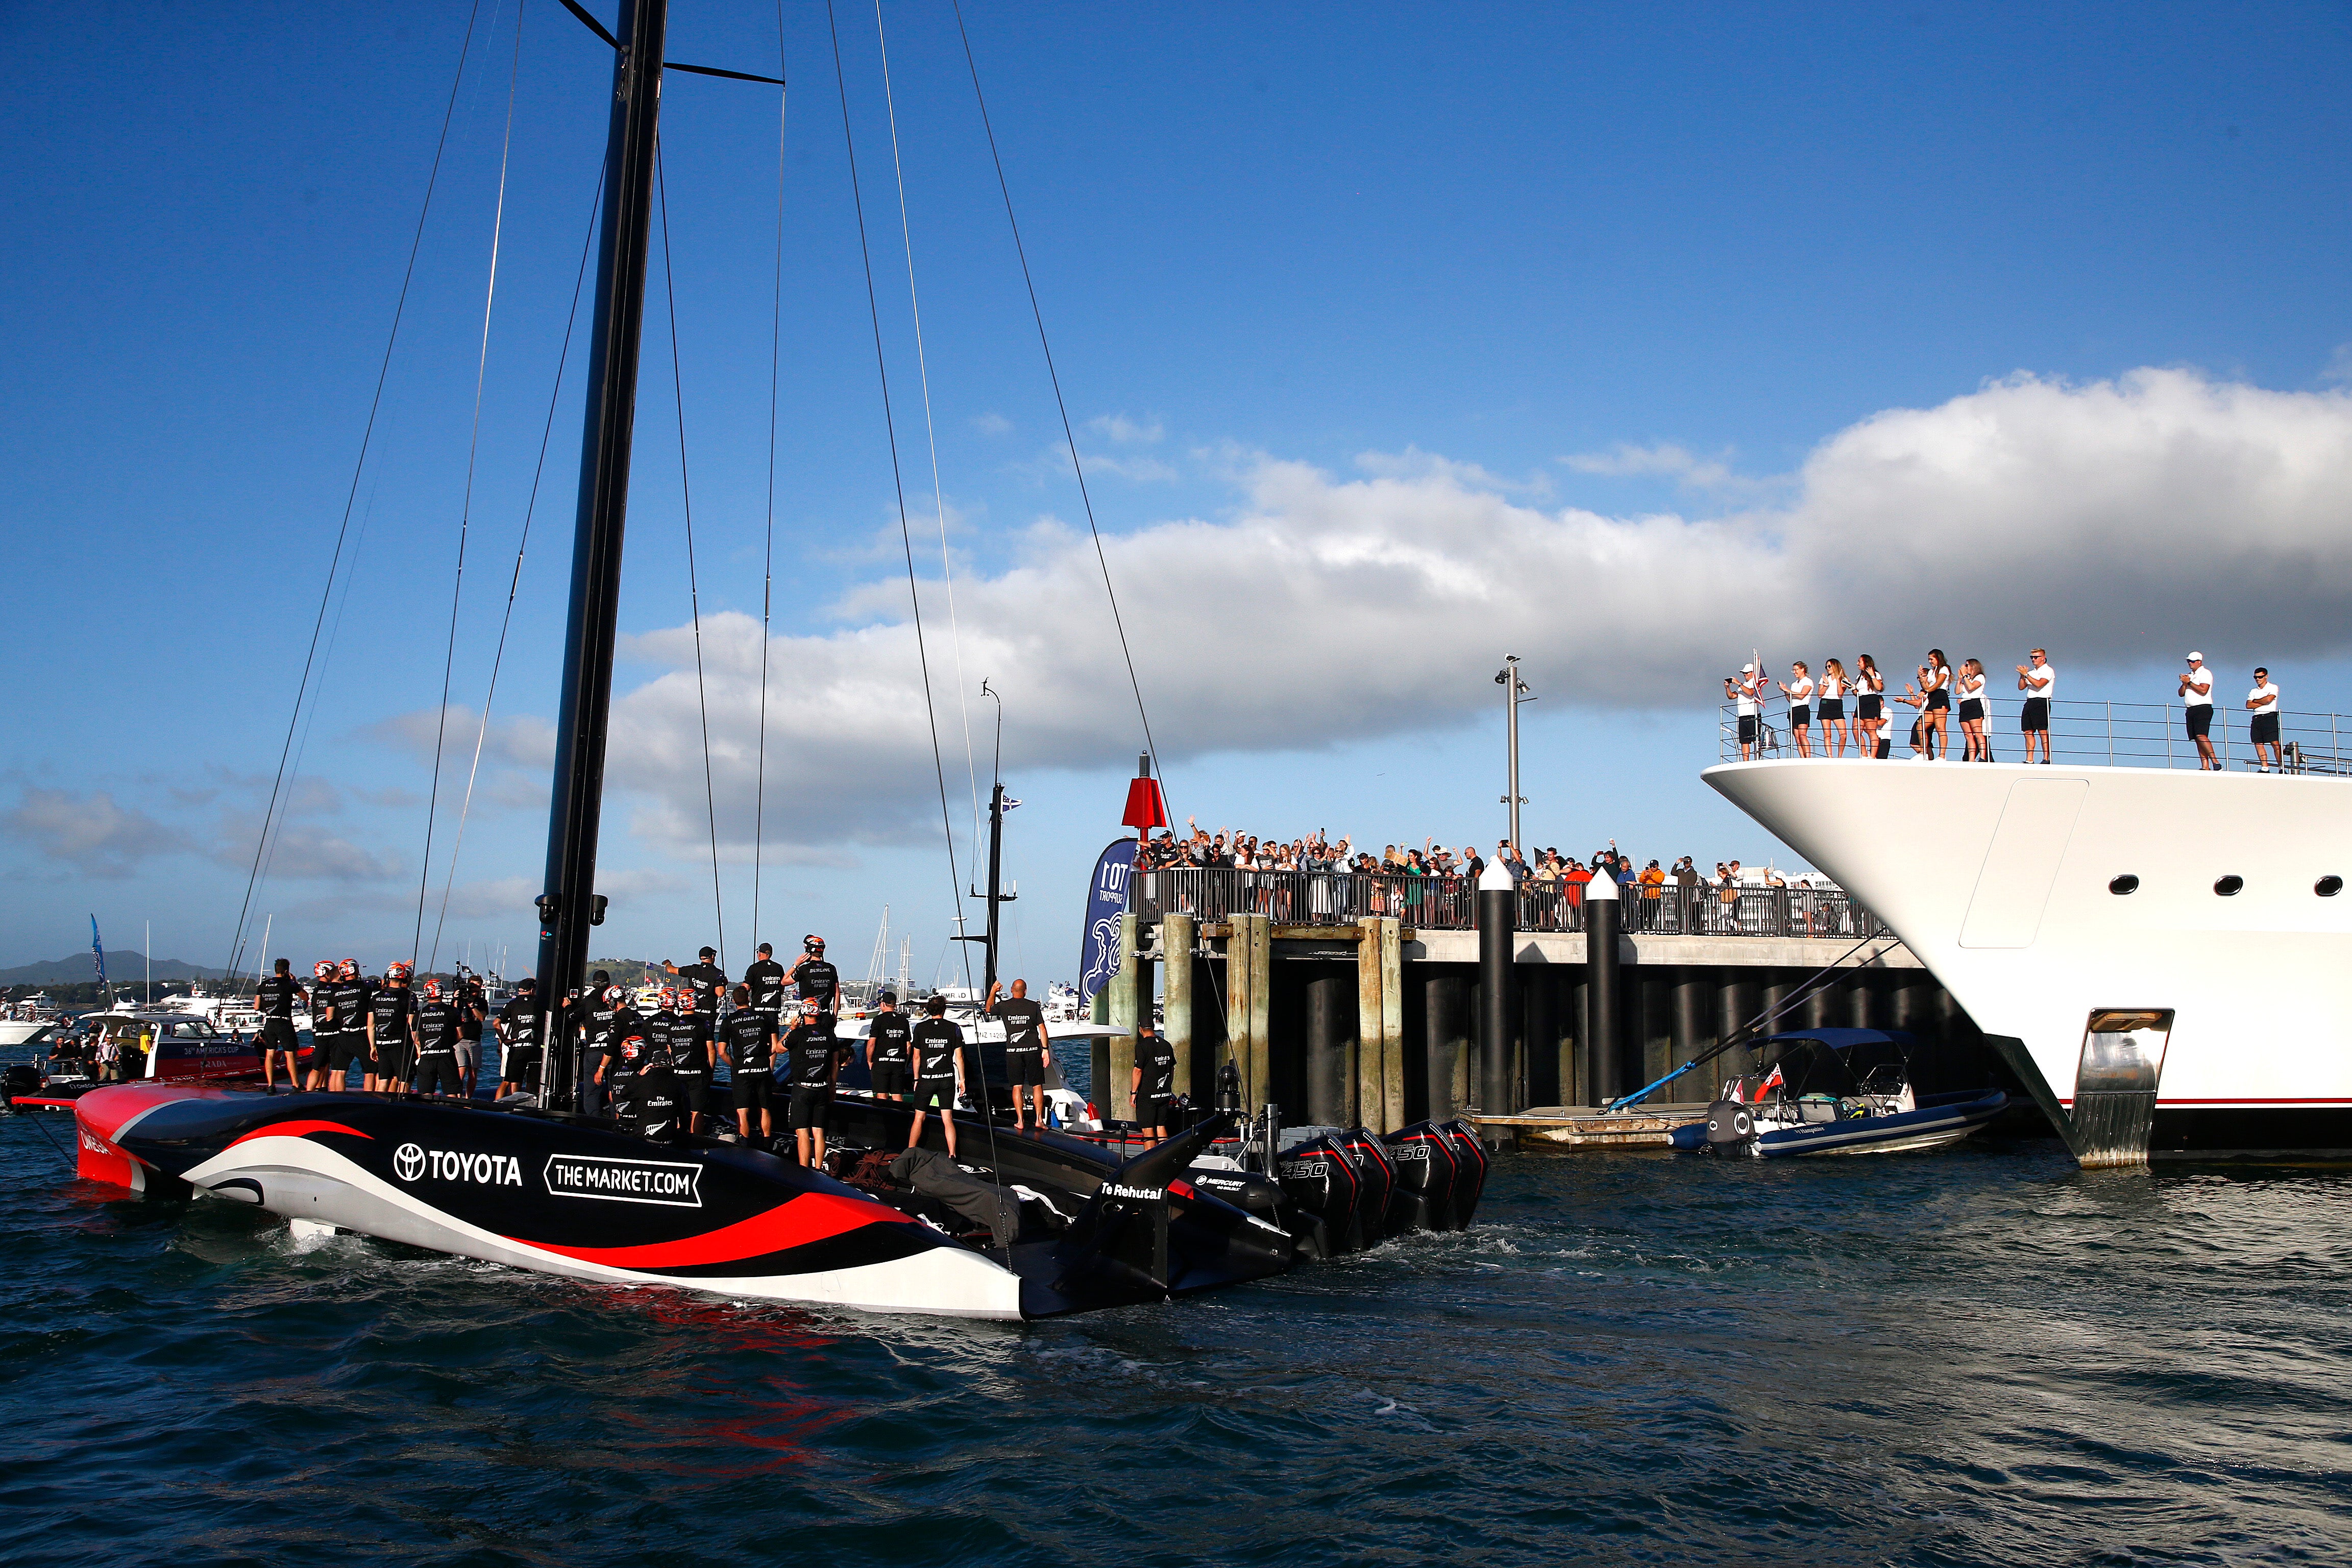 Team New Zealand do a lap around the Viaduct Harbour